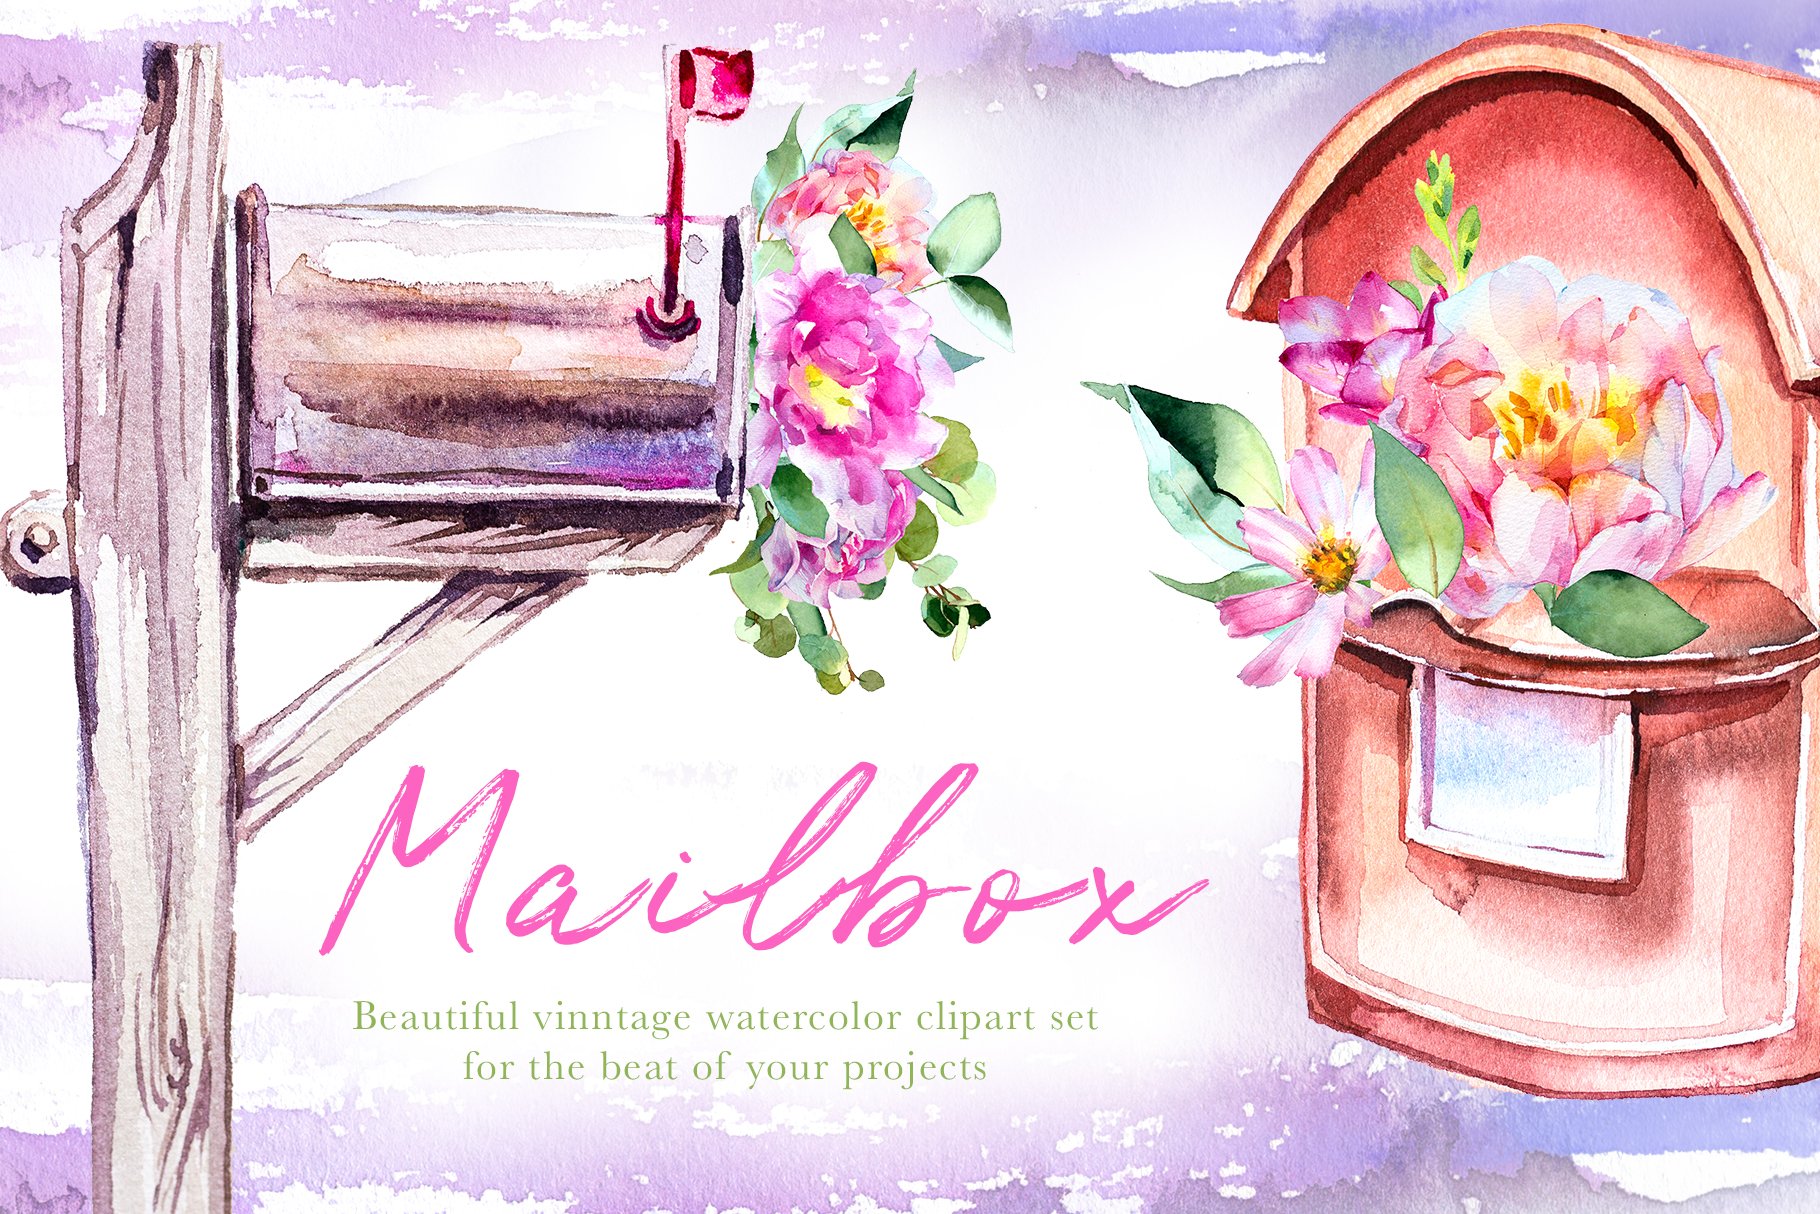 Watercolor Mailbox Clipart Set cover image.